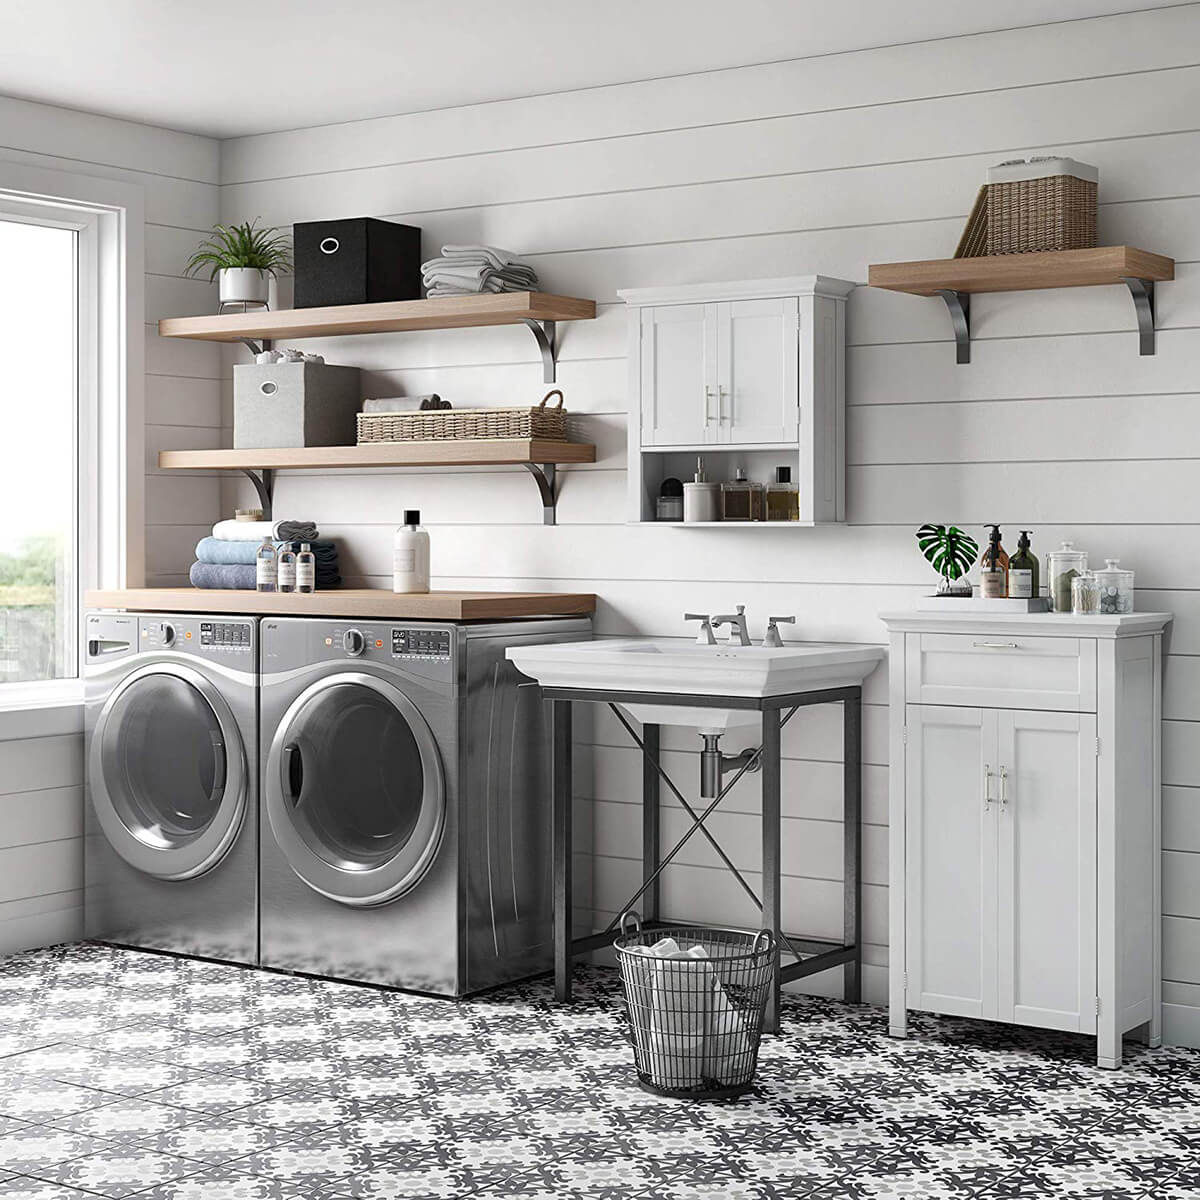 30 Of The Most Stylish And Best Laundry Room Cabinets To Buy In 2020